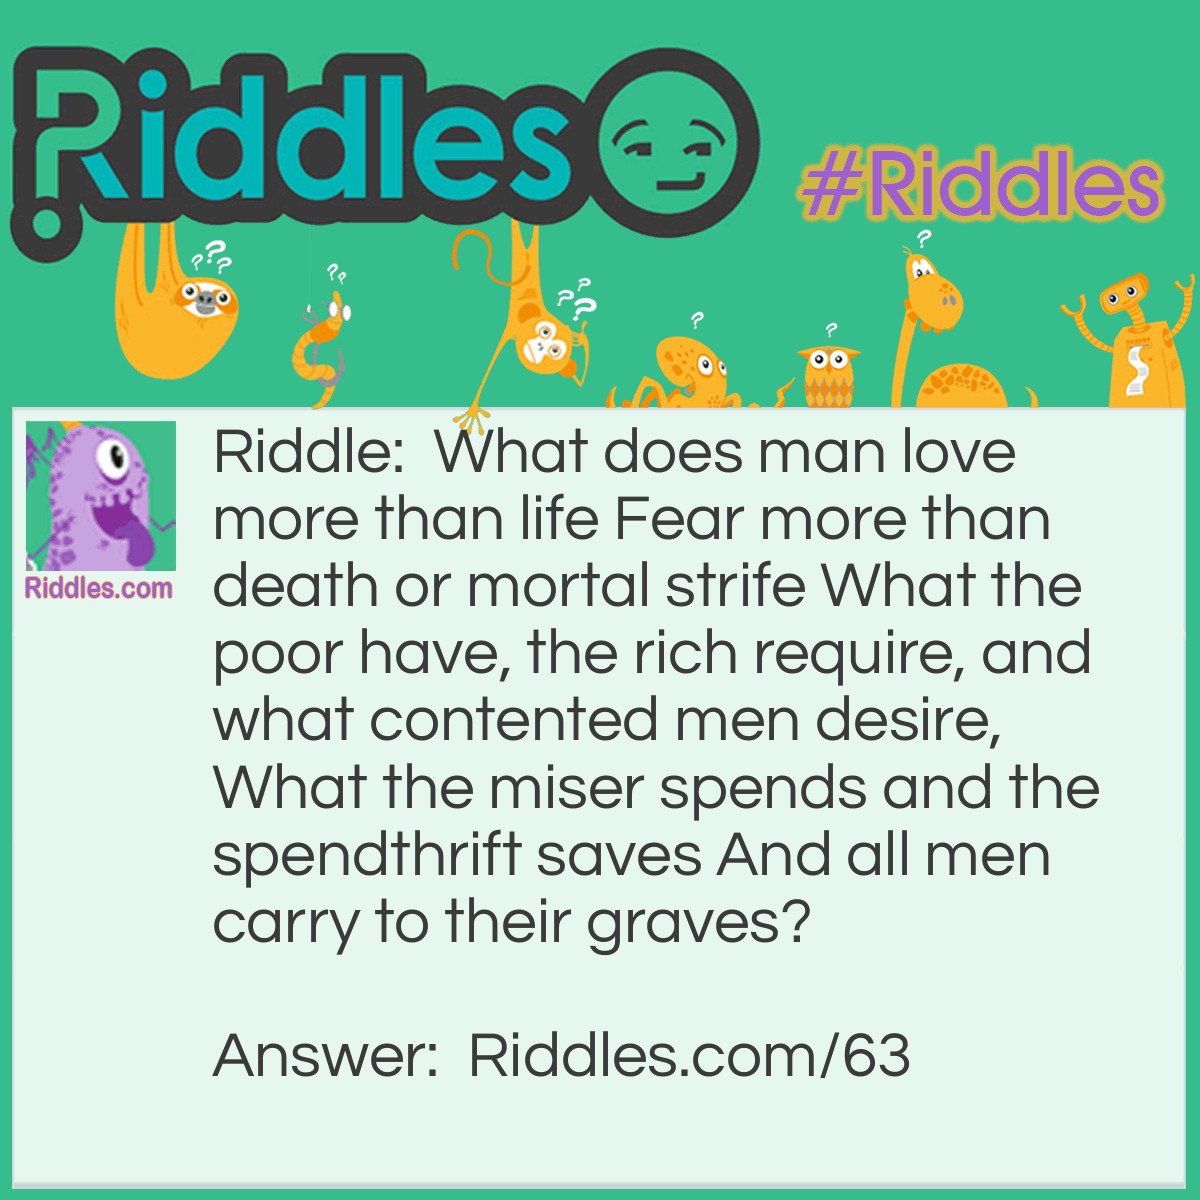 Riddle: What does man love more than life Fear more than death or mortal strife What the poor have, the rich require, and what contented men desire, What the miser spends and the spendthrift saves And all men carry to their graves? Answer: Nothing.